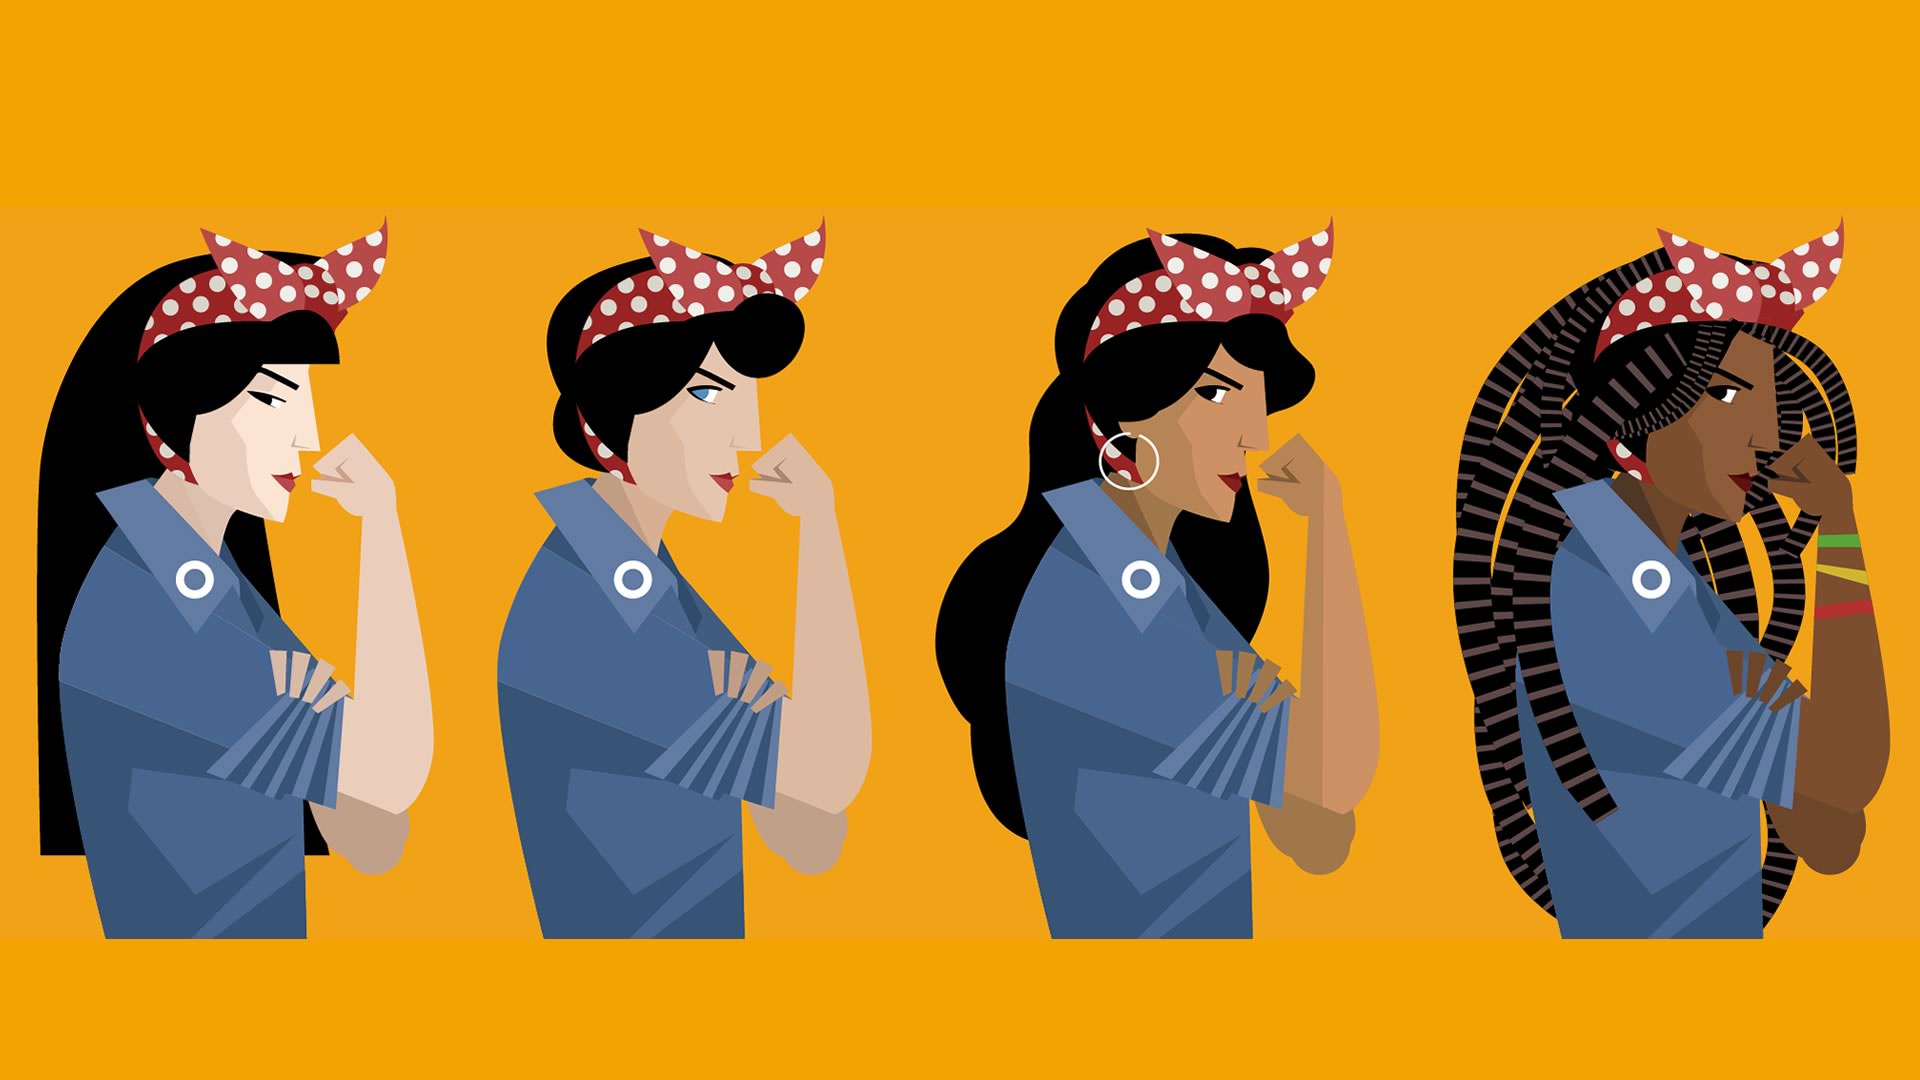 Rosie the Riveter portrayed by various ethnicities